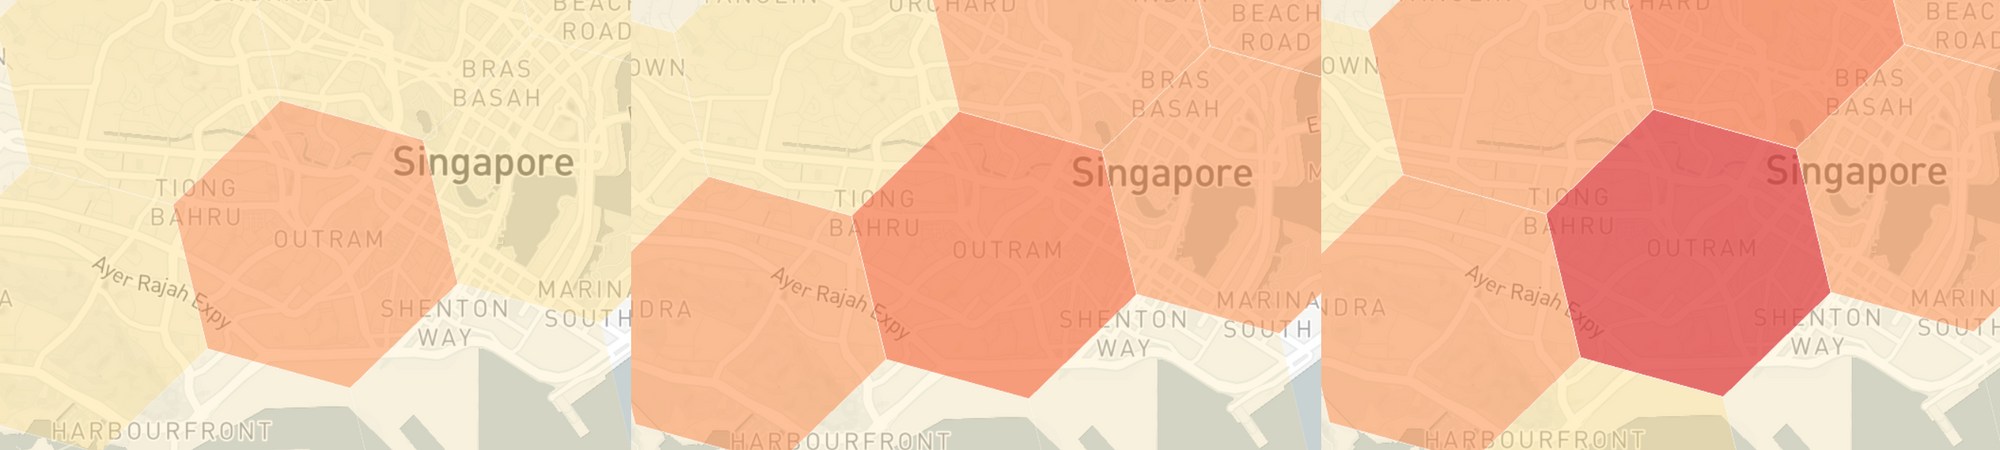 The effect of using the react range slider rc-slider in building a taxi demand heatmap